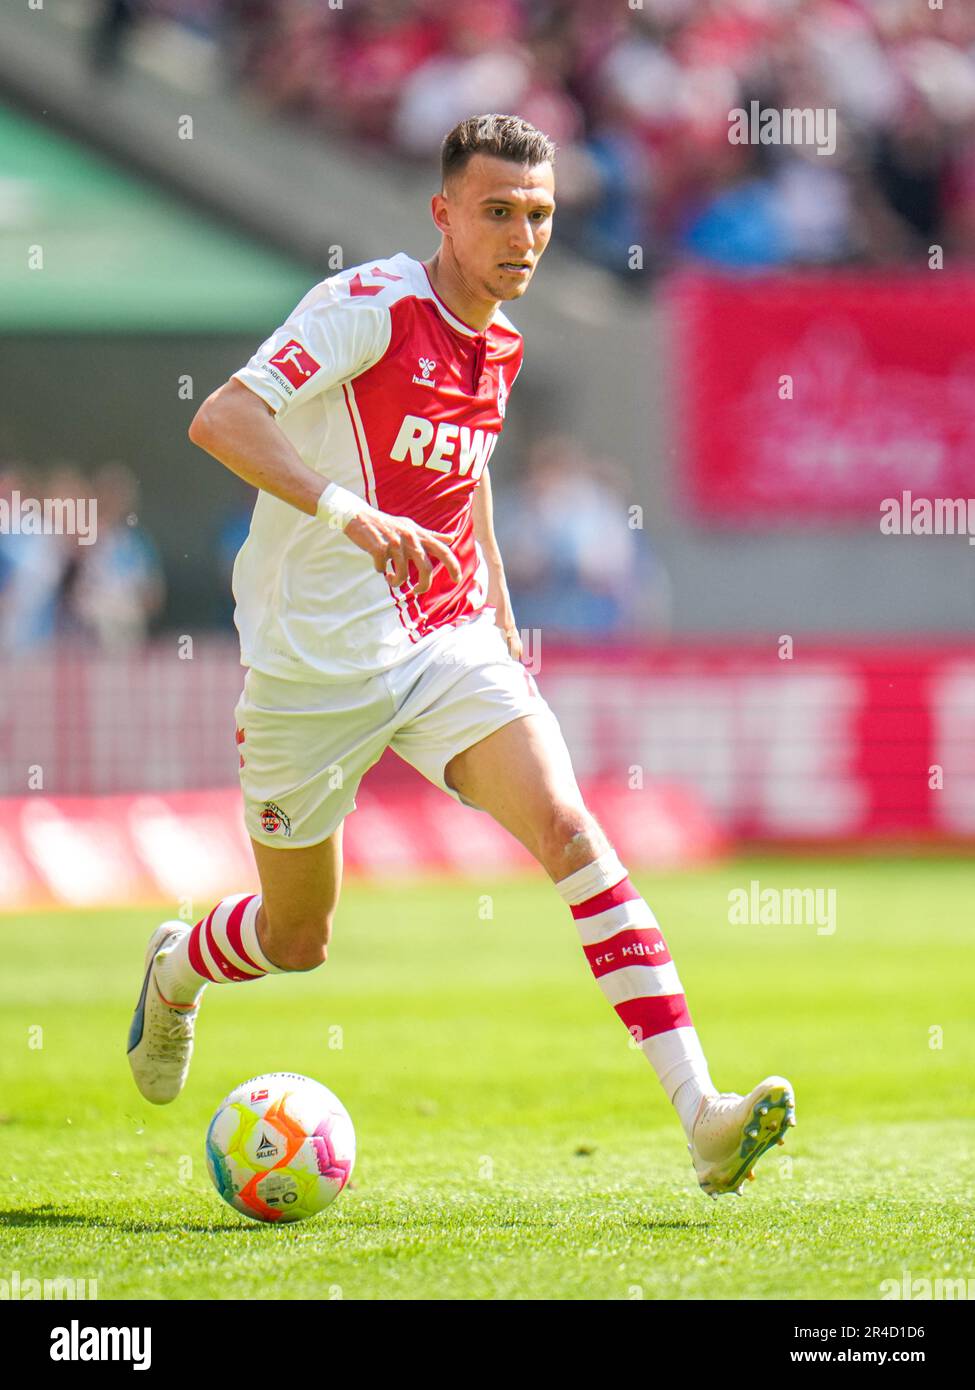 Cologne, Germany. 27th May, 2023. COLOGNE, GERMANY - MAY 27: Dejan Ljubicic of 1. FC Koln during the Bundesliga match between 1. FC Koln and FC Bayern Munchen at the RheinEnergieStadion on May 27, 2023 in Cologne, Germany (Photo by Rene Nijhuis/Orange Pictures) Credit: Orange Pics BV/Alamy Live News Stock Photo